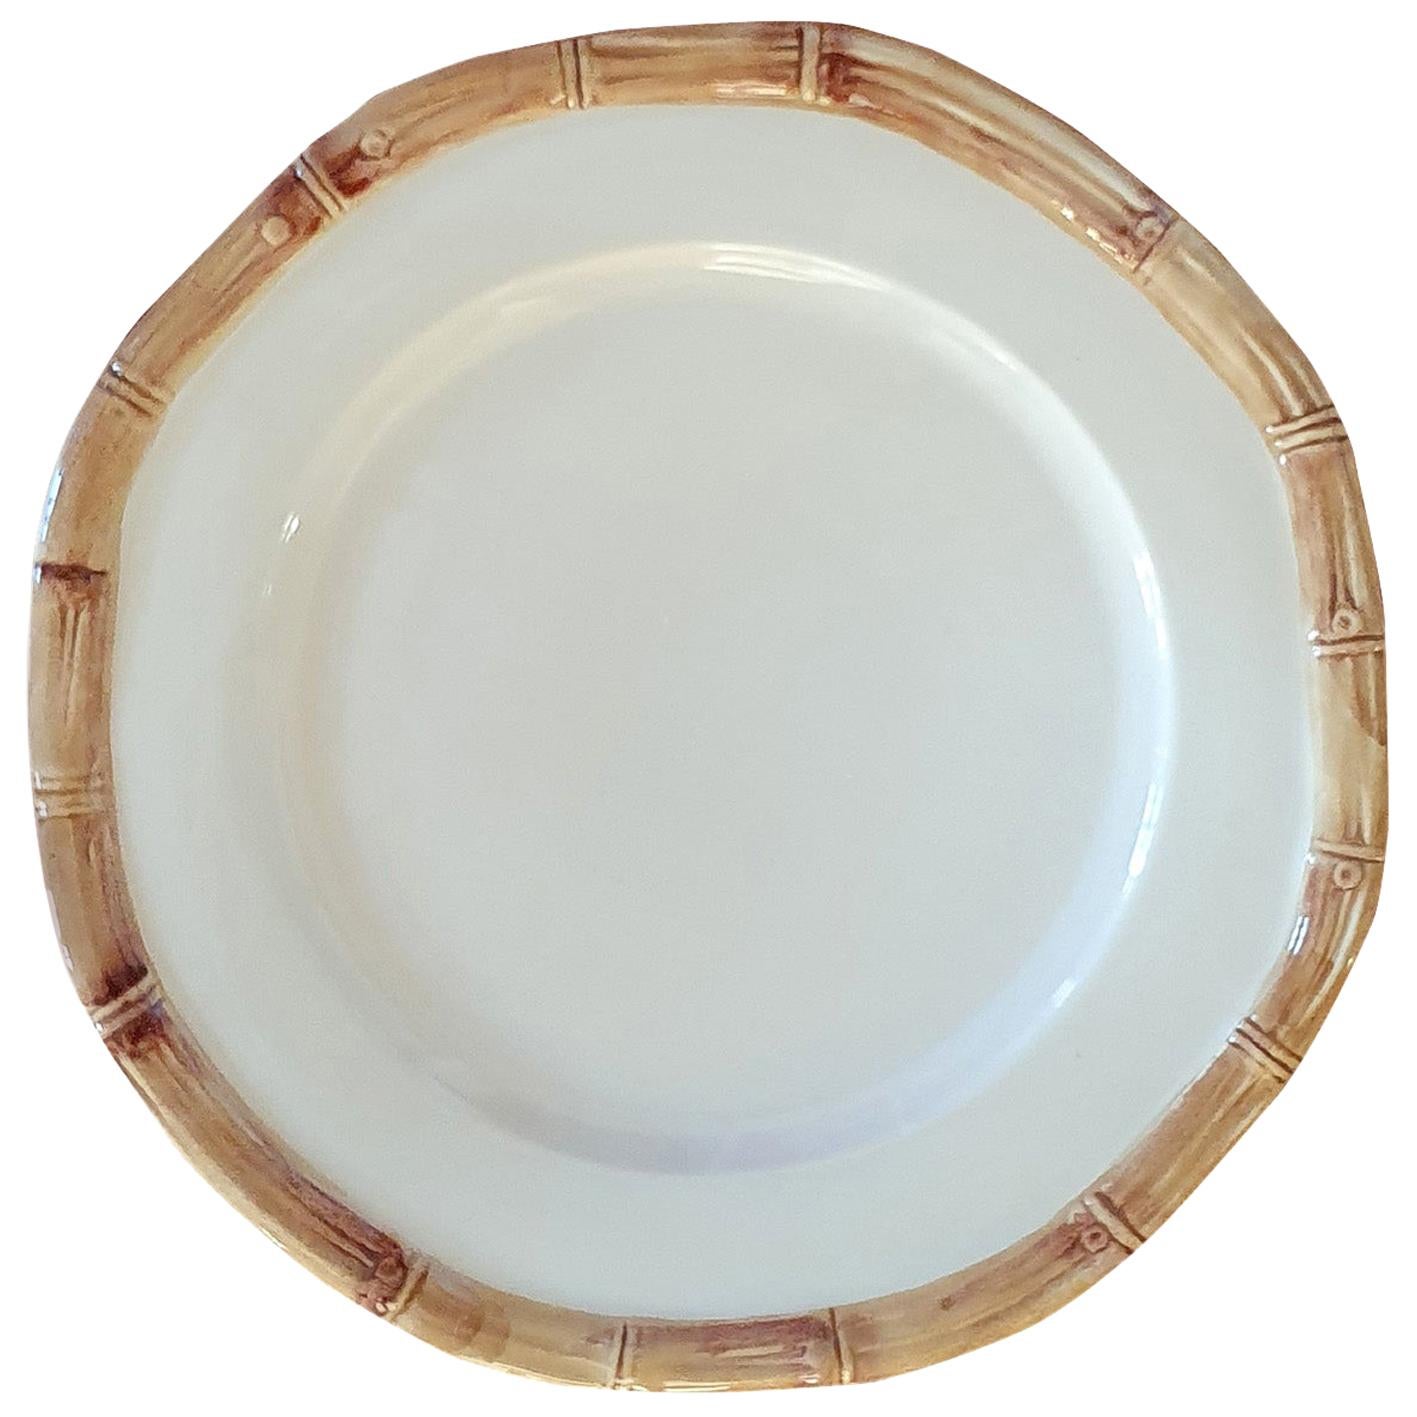 Set of 4 Ceramic Dessert Bamboo Plates, Made in Italy